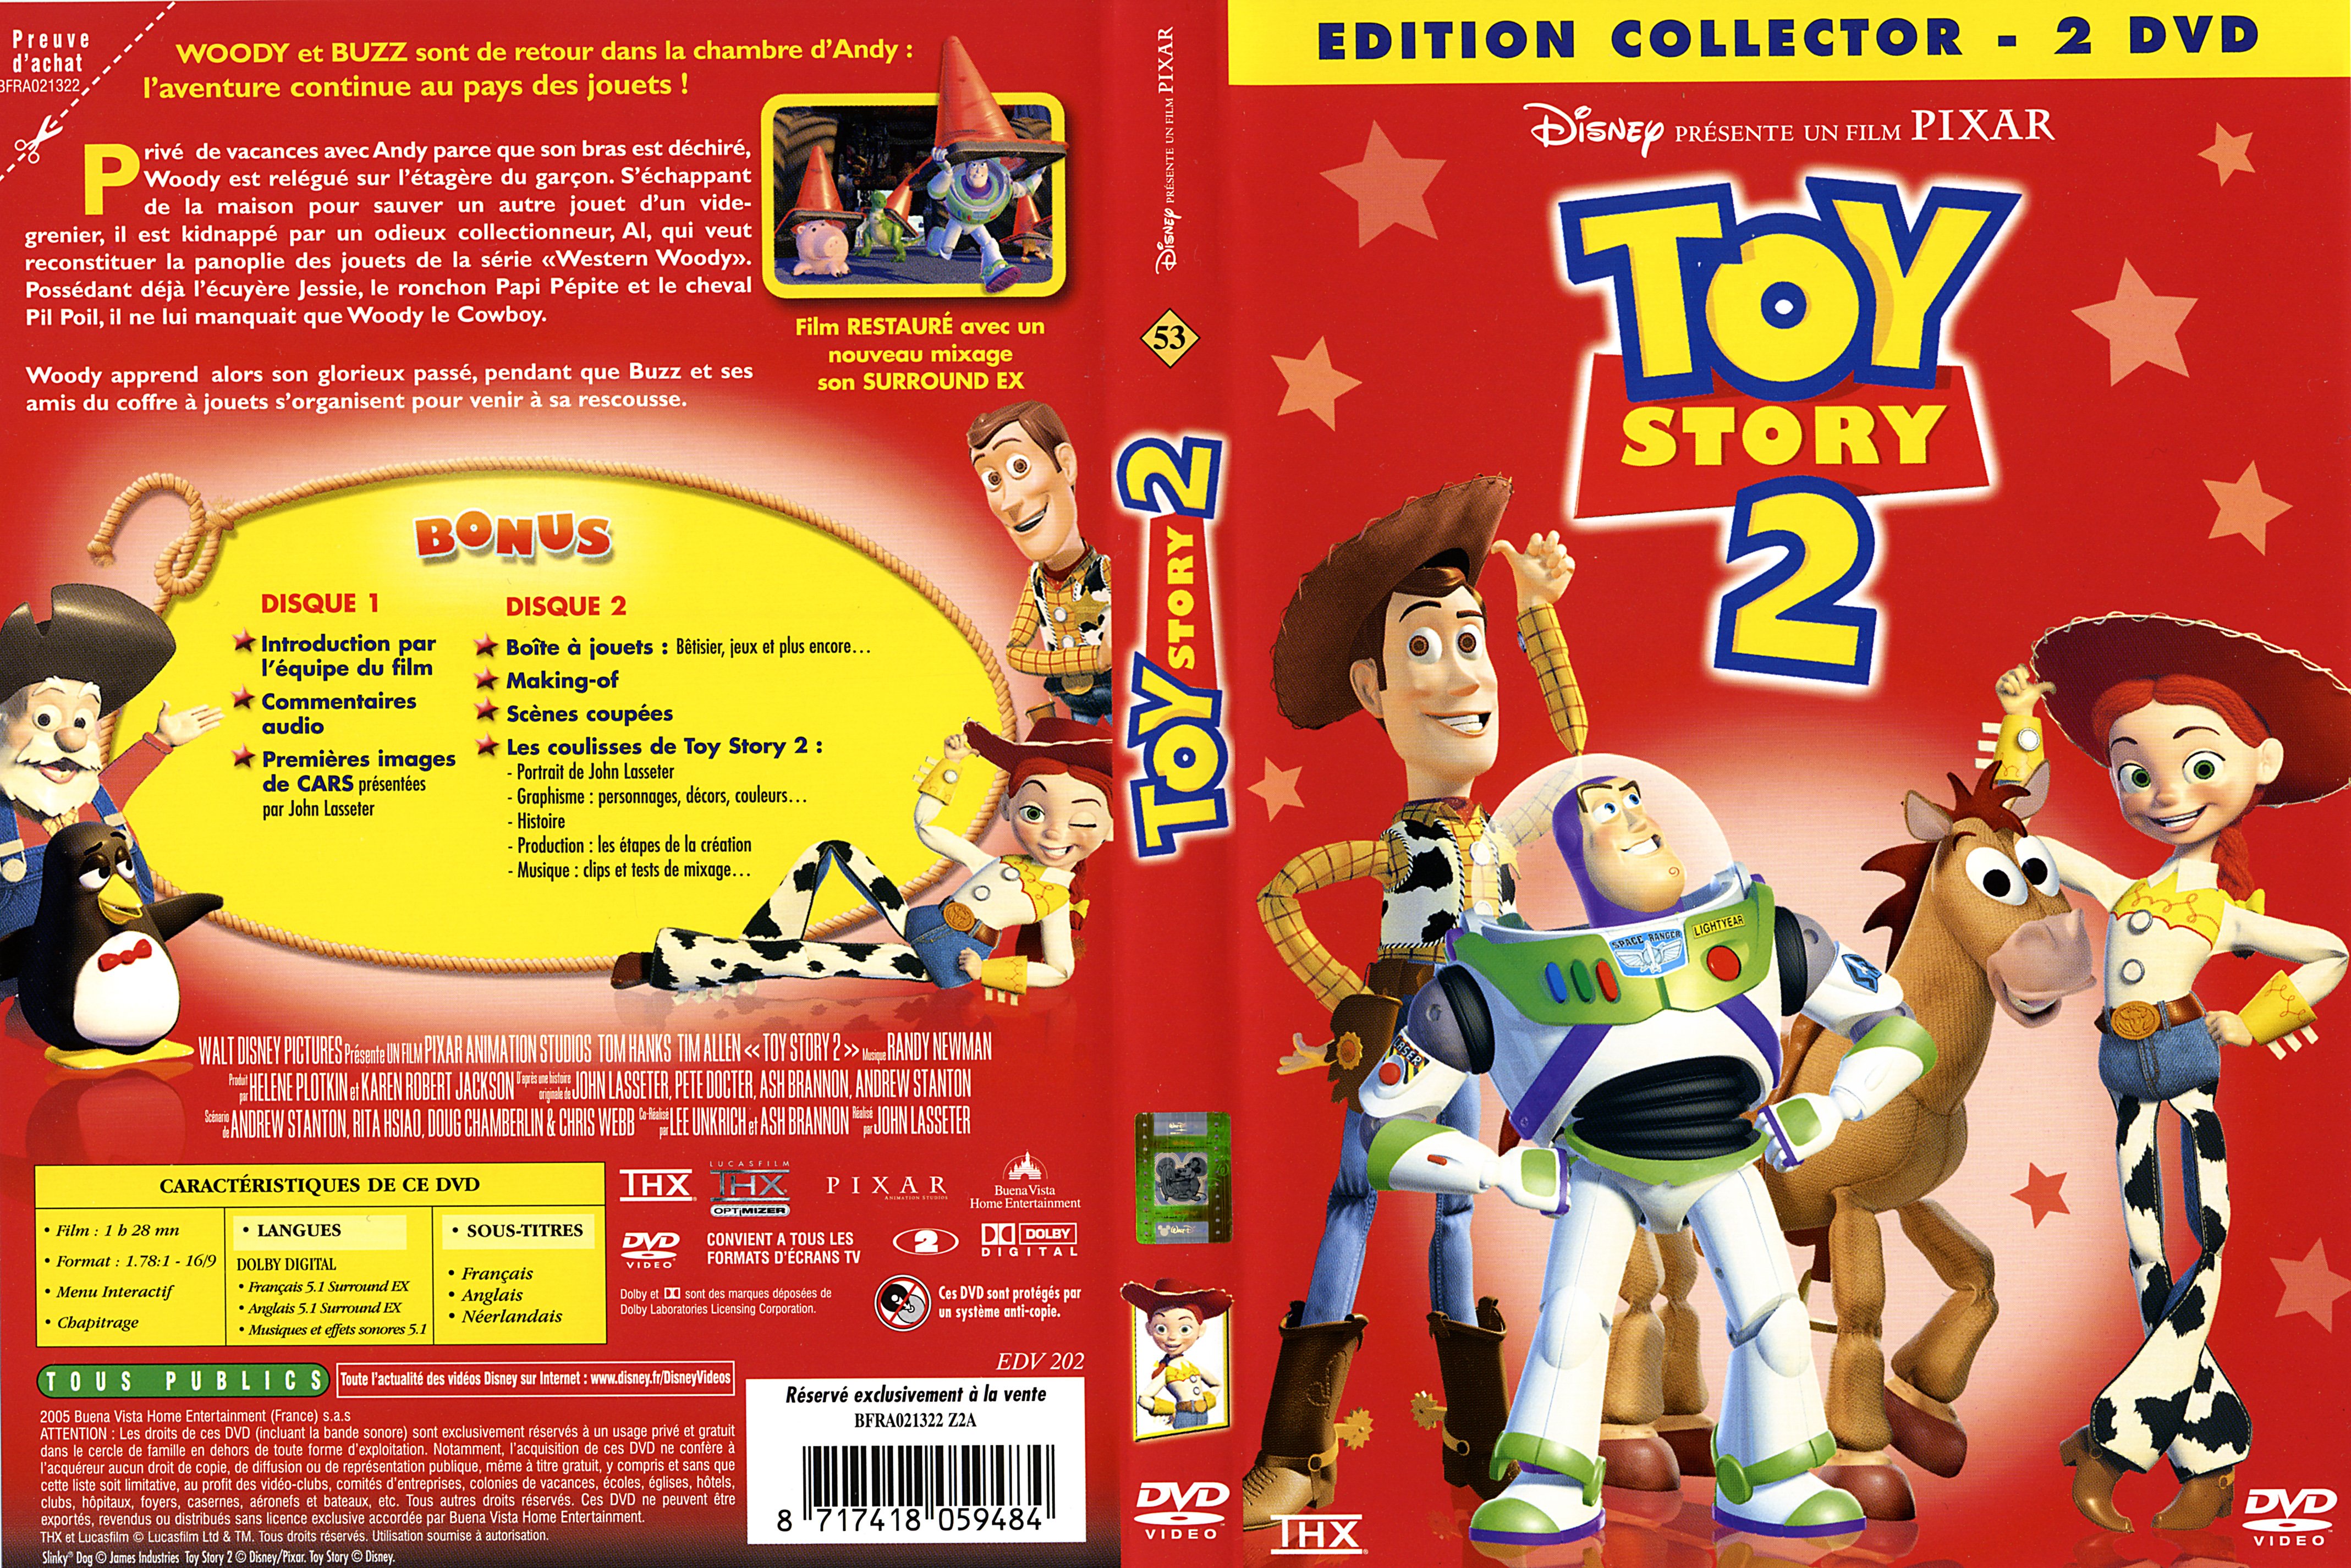 Jaquette DVD Toy Story 2.